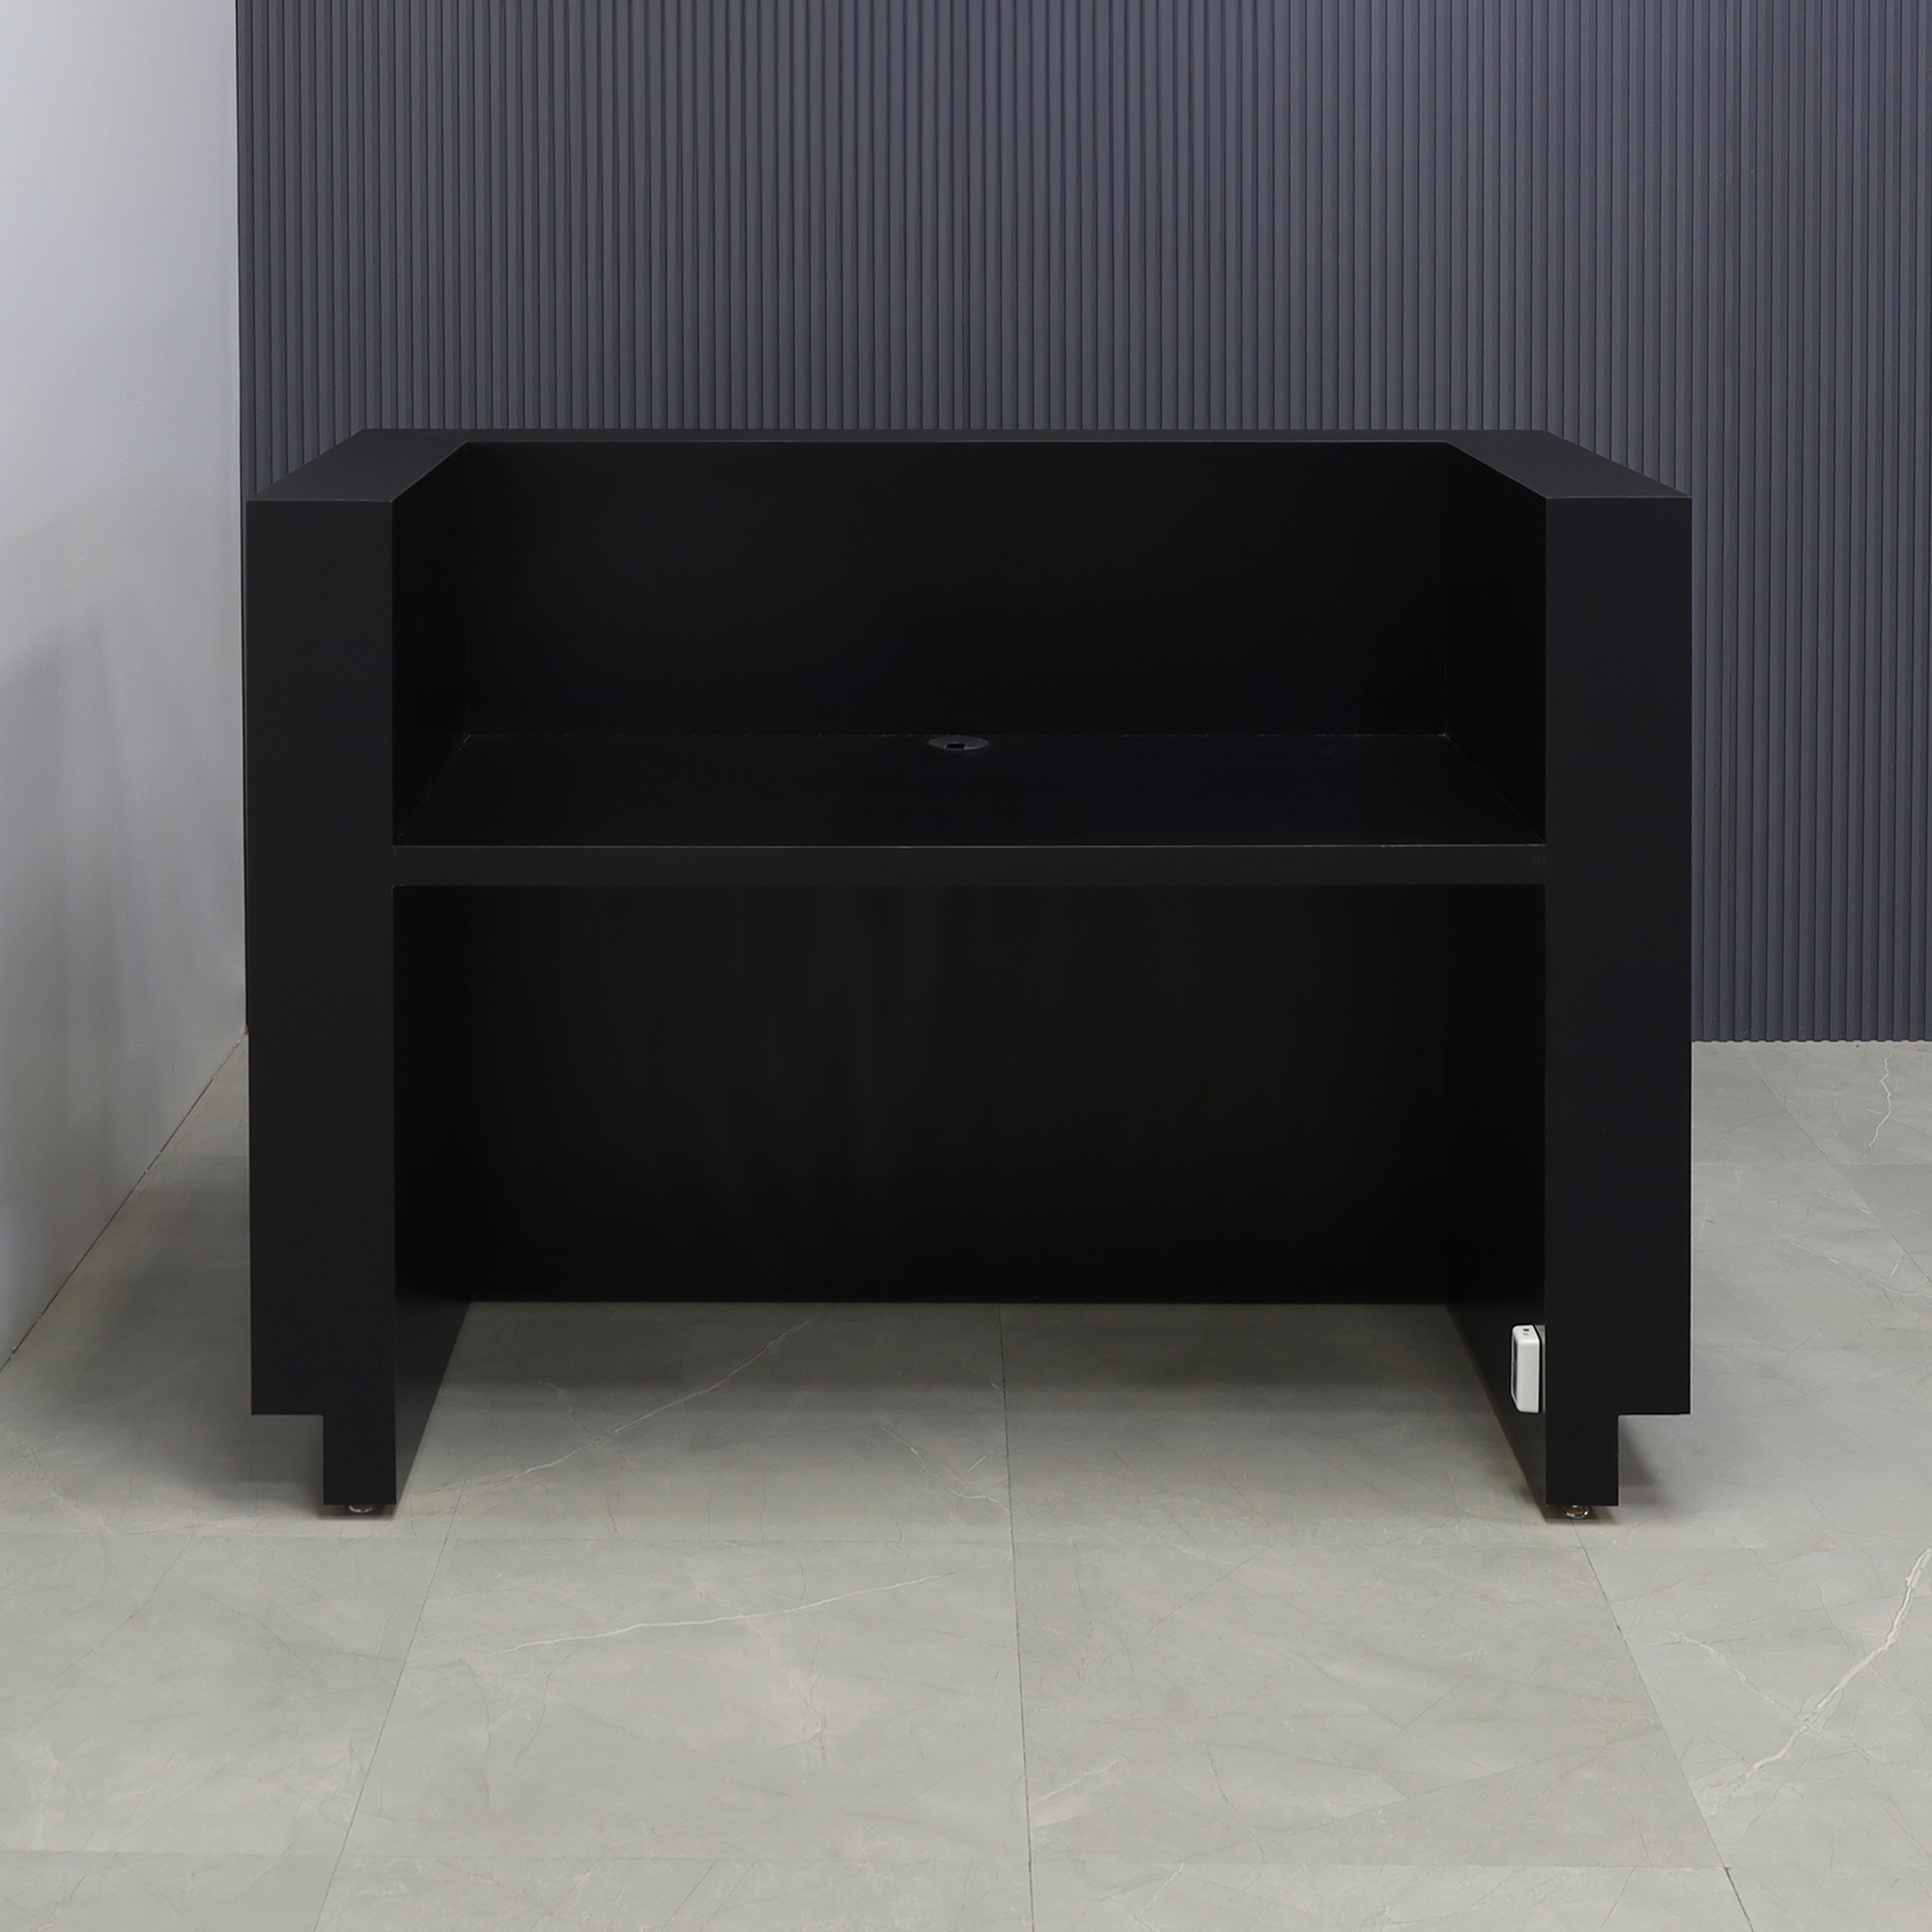 60 inches Black Traceless laminate finish desk and black matte laminate finish toe-kick, with multi-colored LED, seating side view shown here.